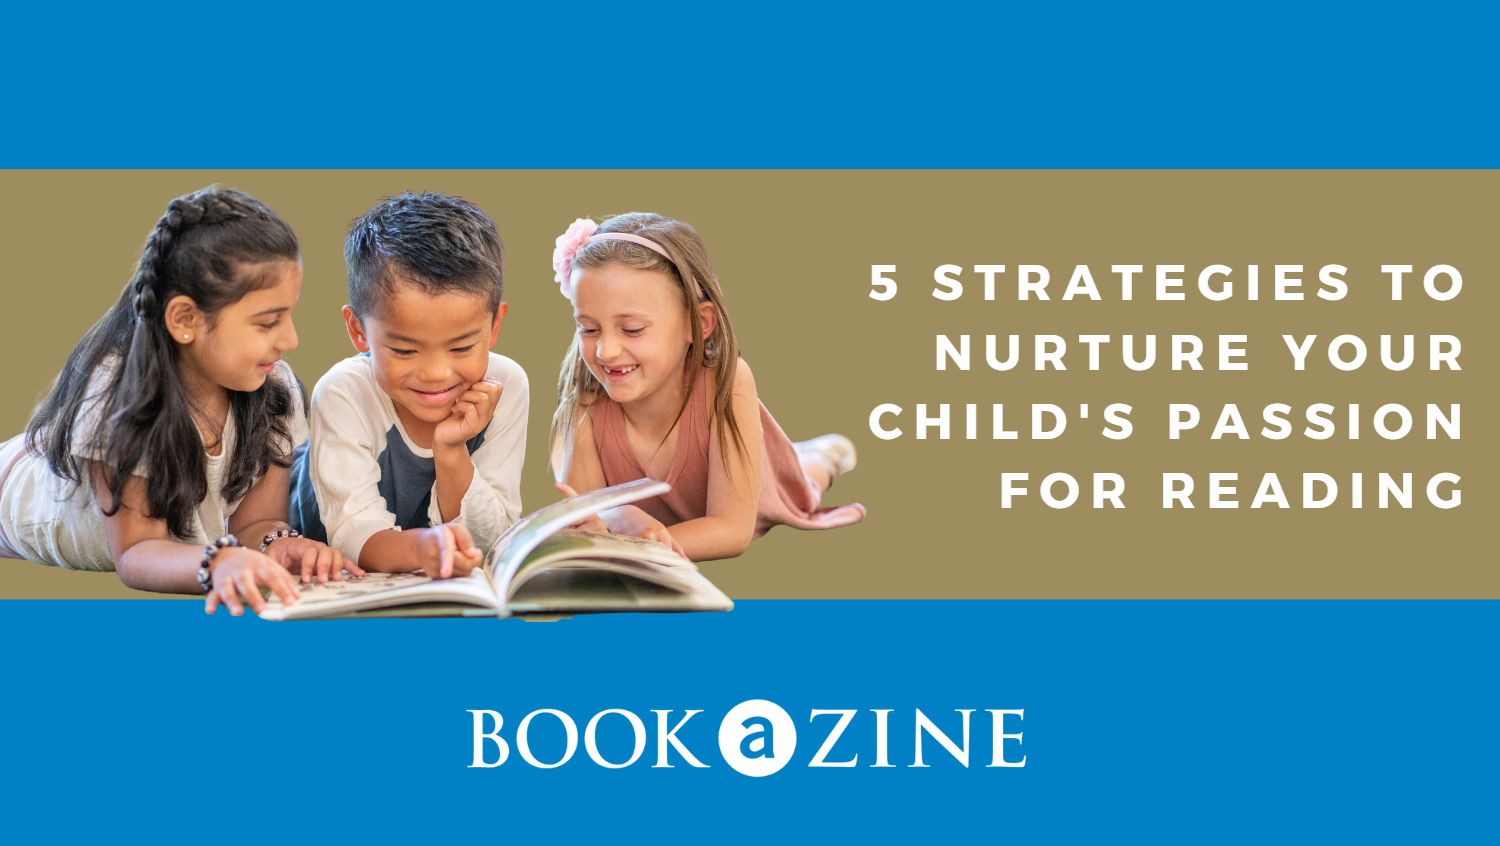 5 Strategies to Nurture Your Child's Passion for Reading